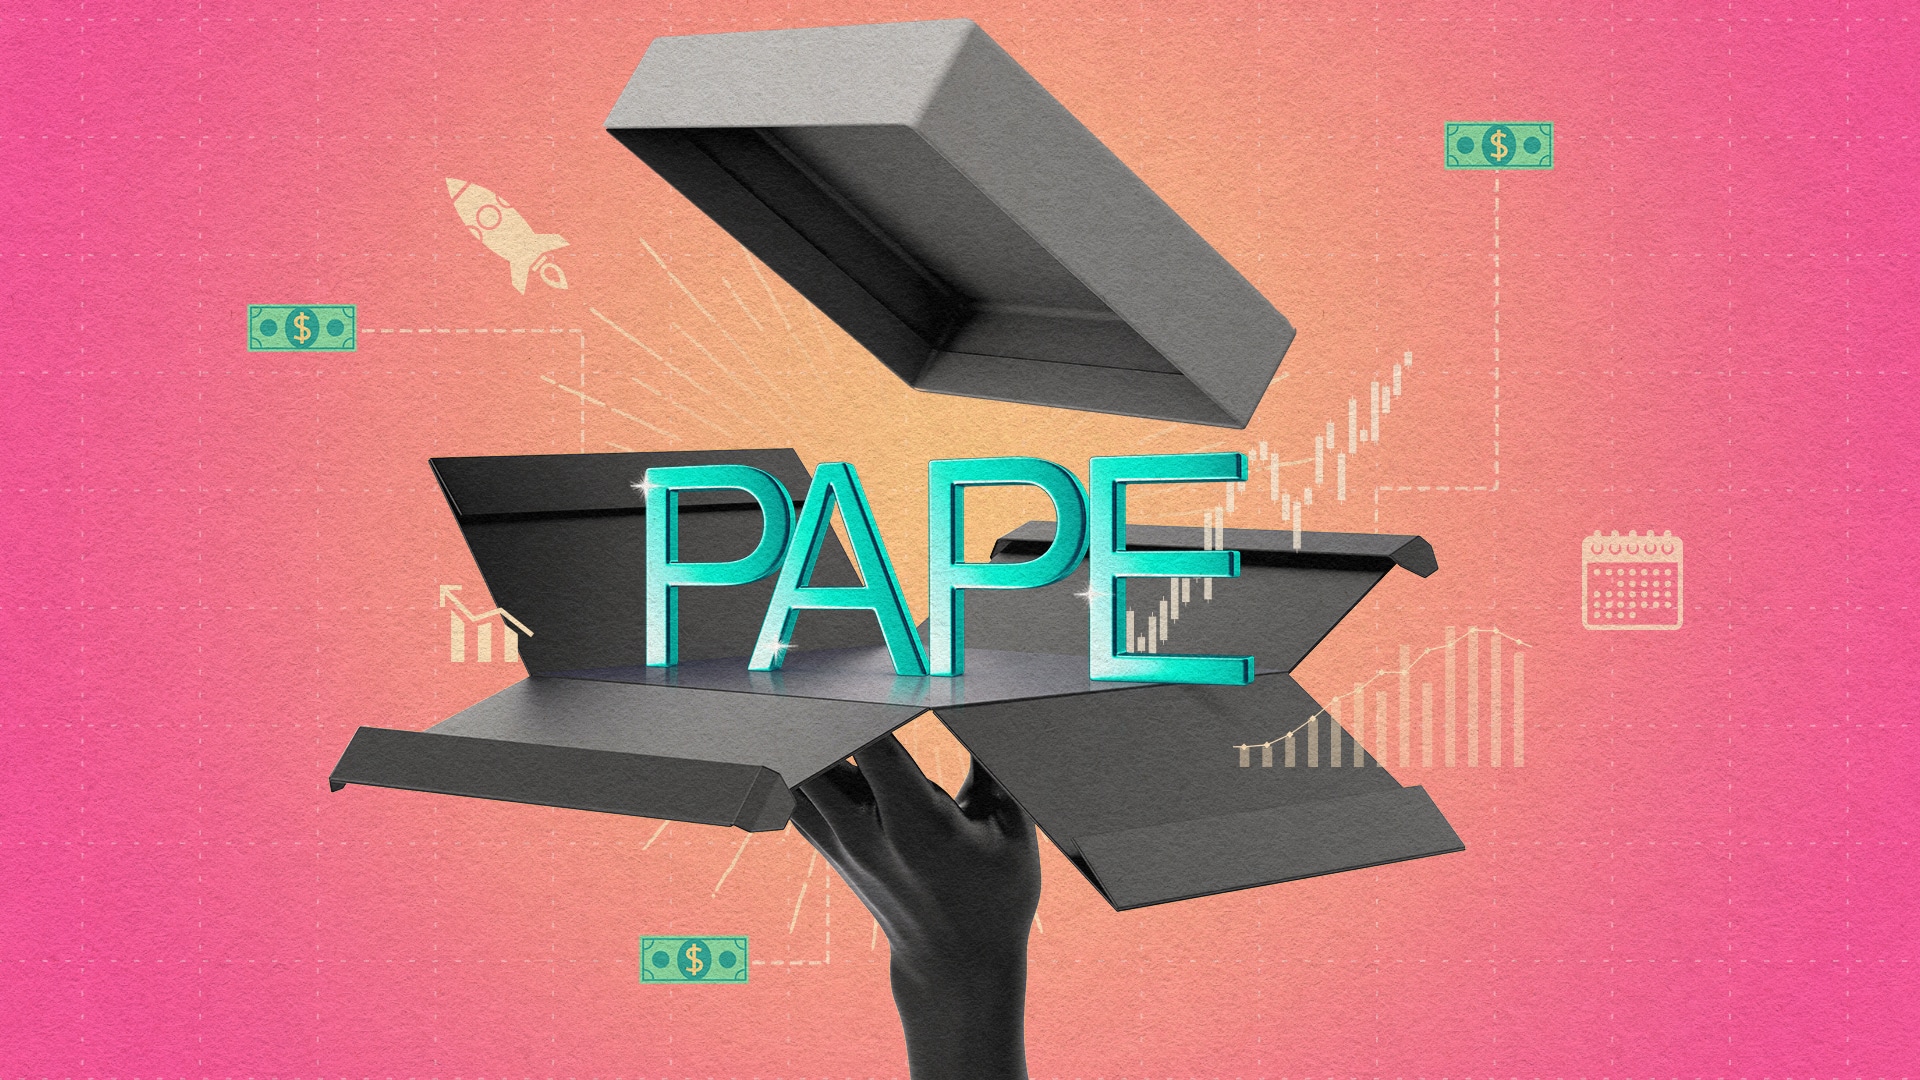 Illustration of the letters "PAPE" along with financial imagery colourfully exploding out of a box.